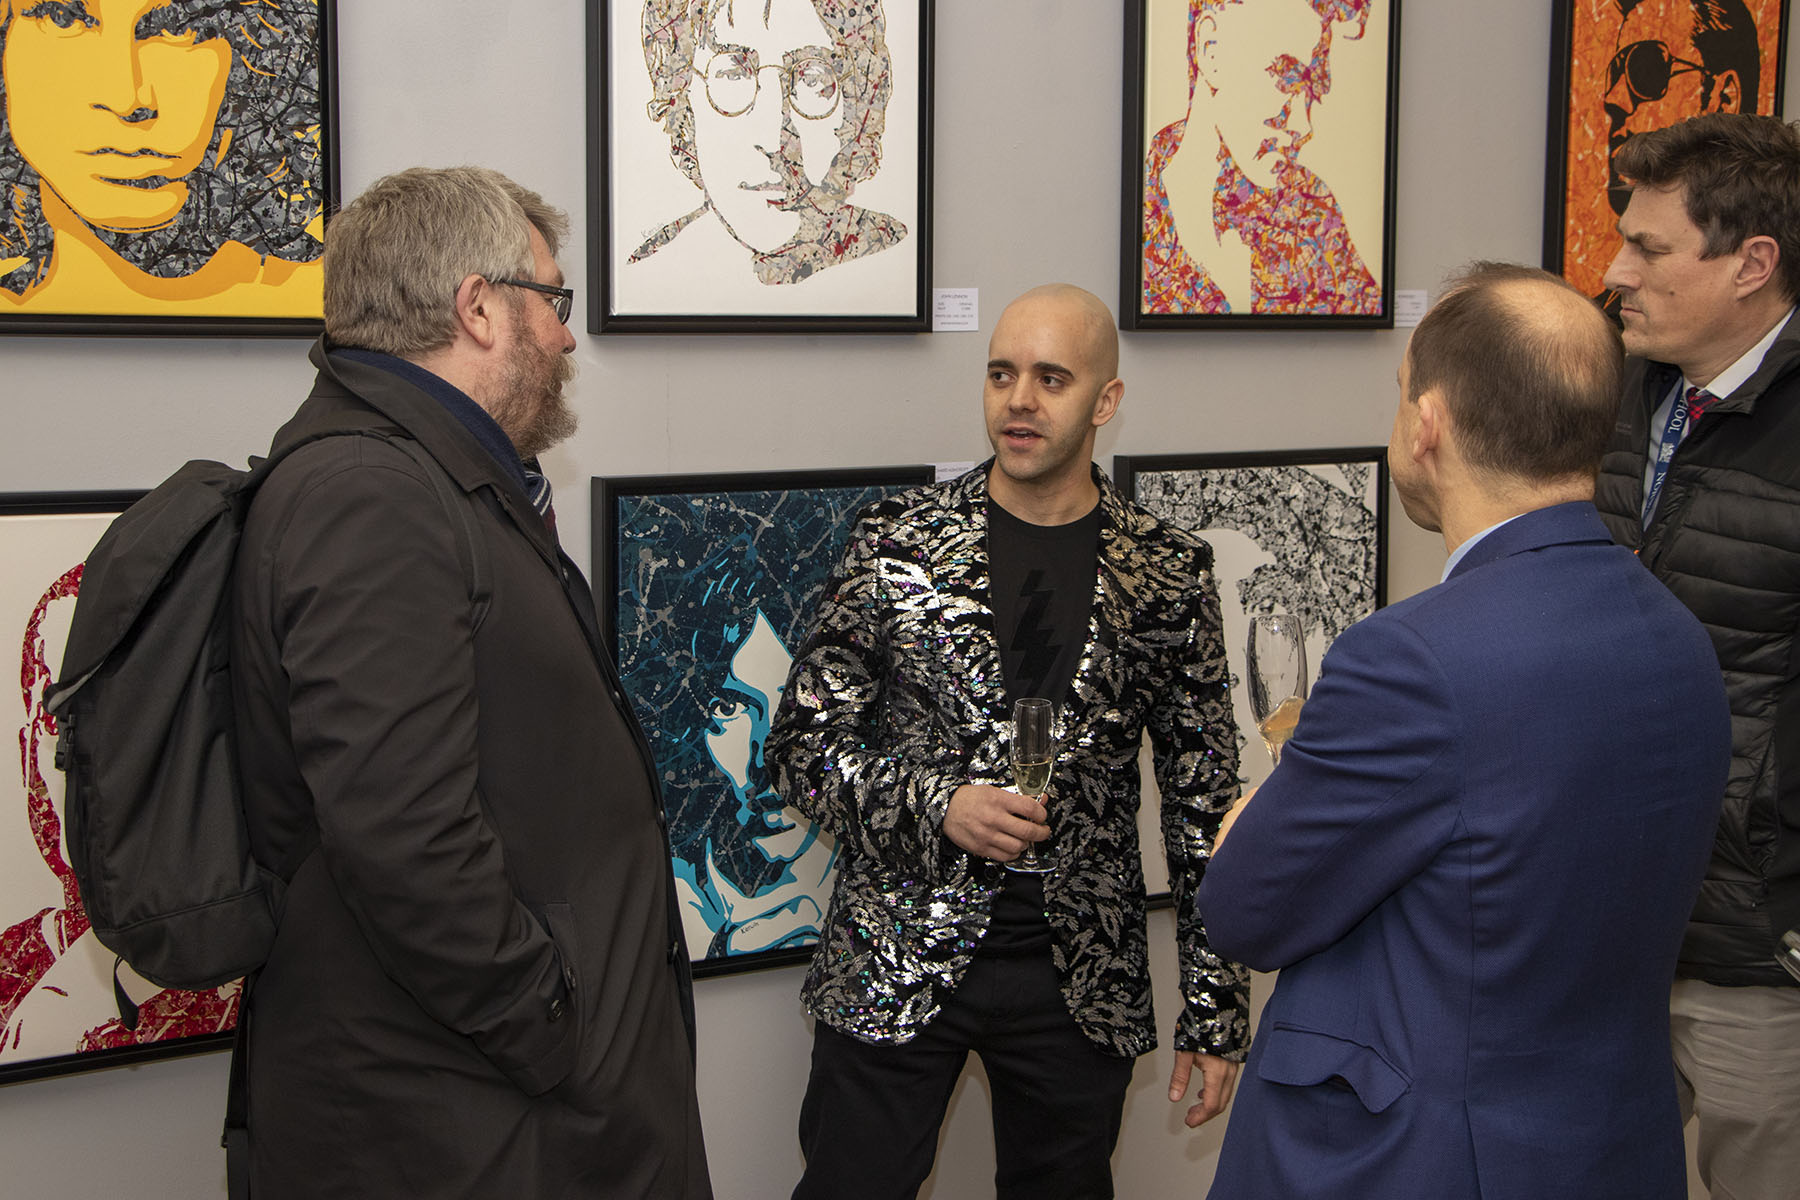 Kerwin Blackburn exhibiting his Jackson Pollock-inspired pop art music paintings at the Crypt Gallery at Norwich School in Norfolk, February-March 2022 | By Kerwin | John Lennon | Richard Ashcroft The Verve prints